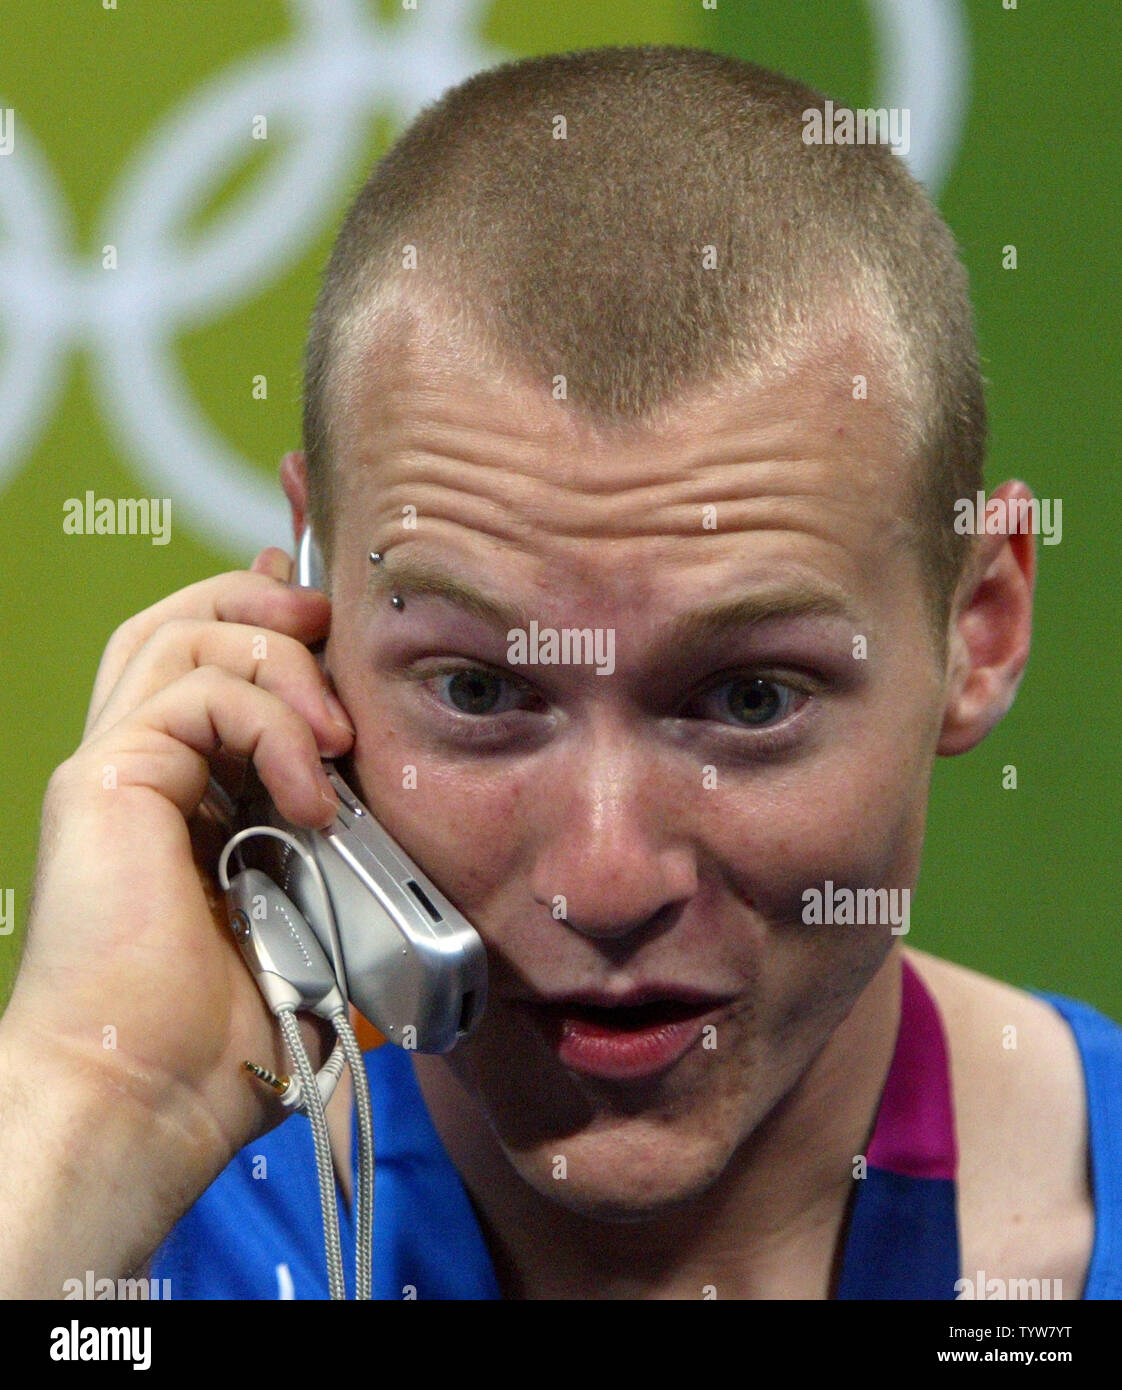 Canadian gymnast Kyle Shewfelt takes a call from Paul Martin, the prime minister of Canada, after winning the country's first gold medal at the Olympic Games. Shewfelt, of Calgary, won the floor exercises finals in a tie-breaker with Romania's Marian Dragulescu at the Athens Olympic Indoor Hall on August 22, 2004.  (UPI Photo / Grace Chiu) Stock Photo